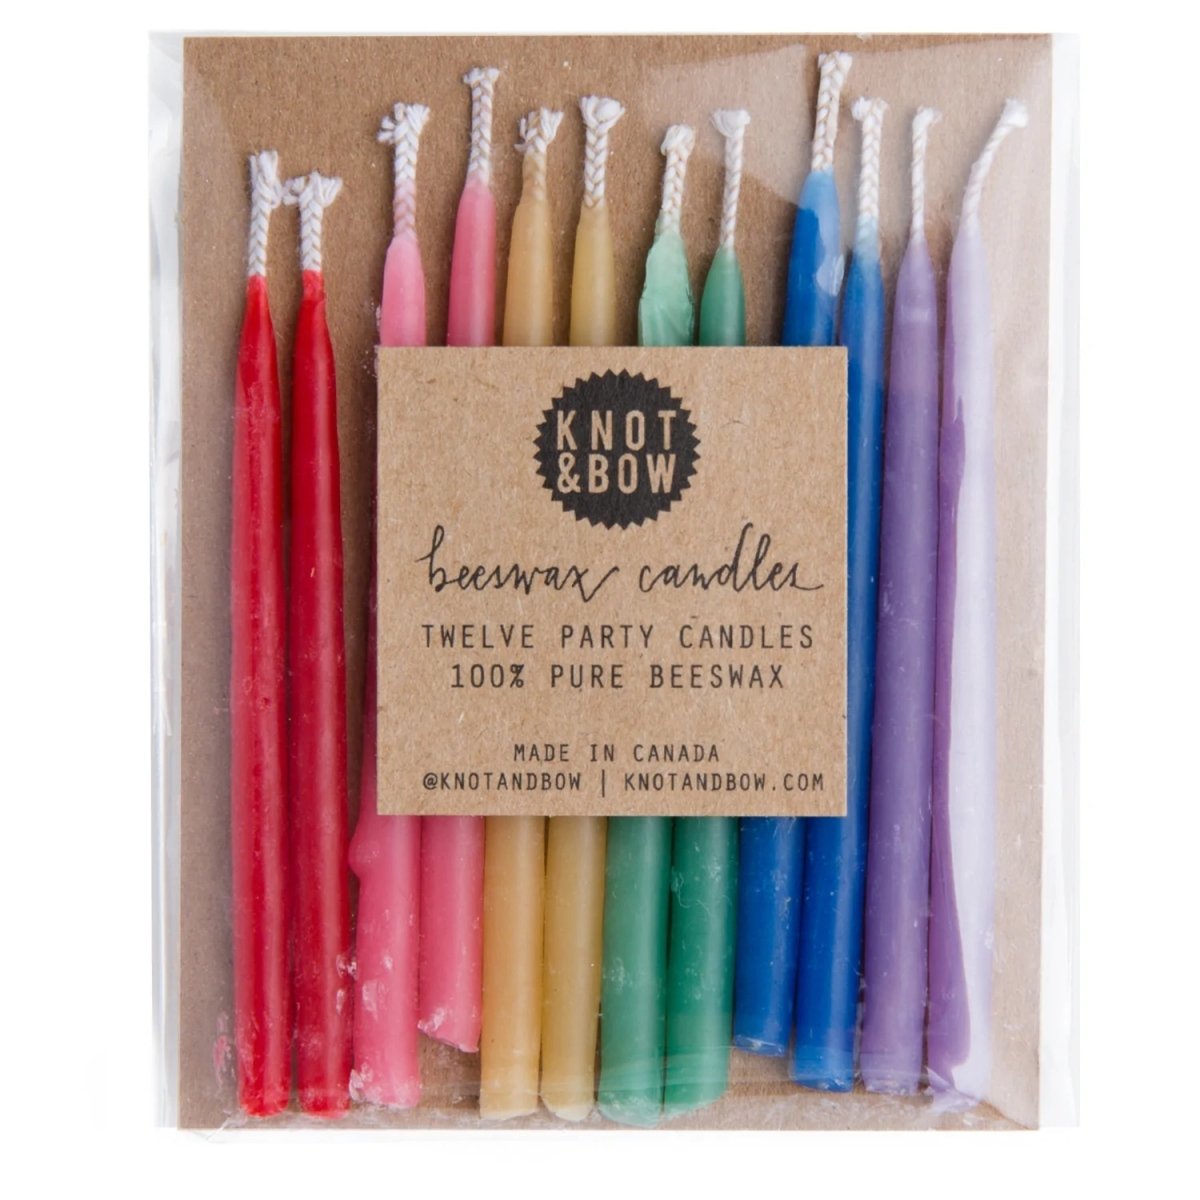 Knot & Bow - Beeswax Candles (12CT) - The Epicurean Trader